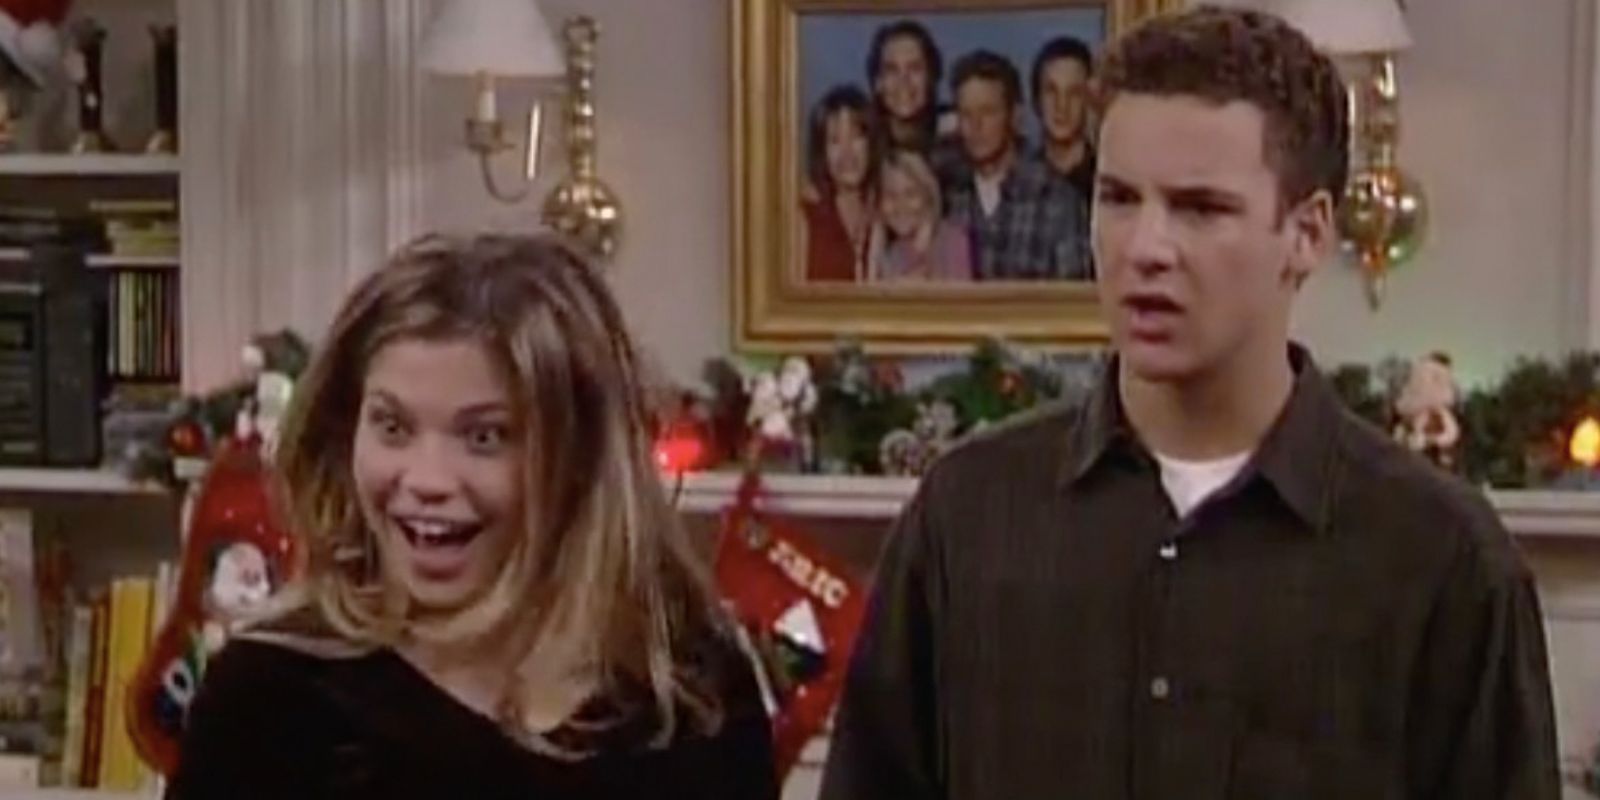 Topanga is excited and Cory is confused in the Boy Meets World episode A Very Topanga Christmas